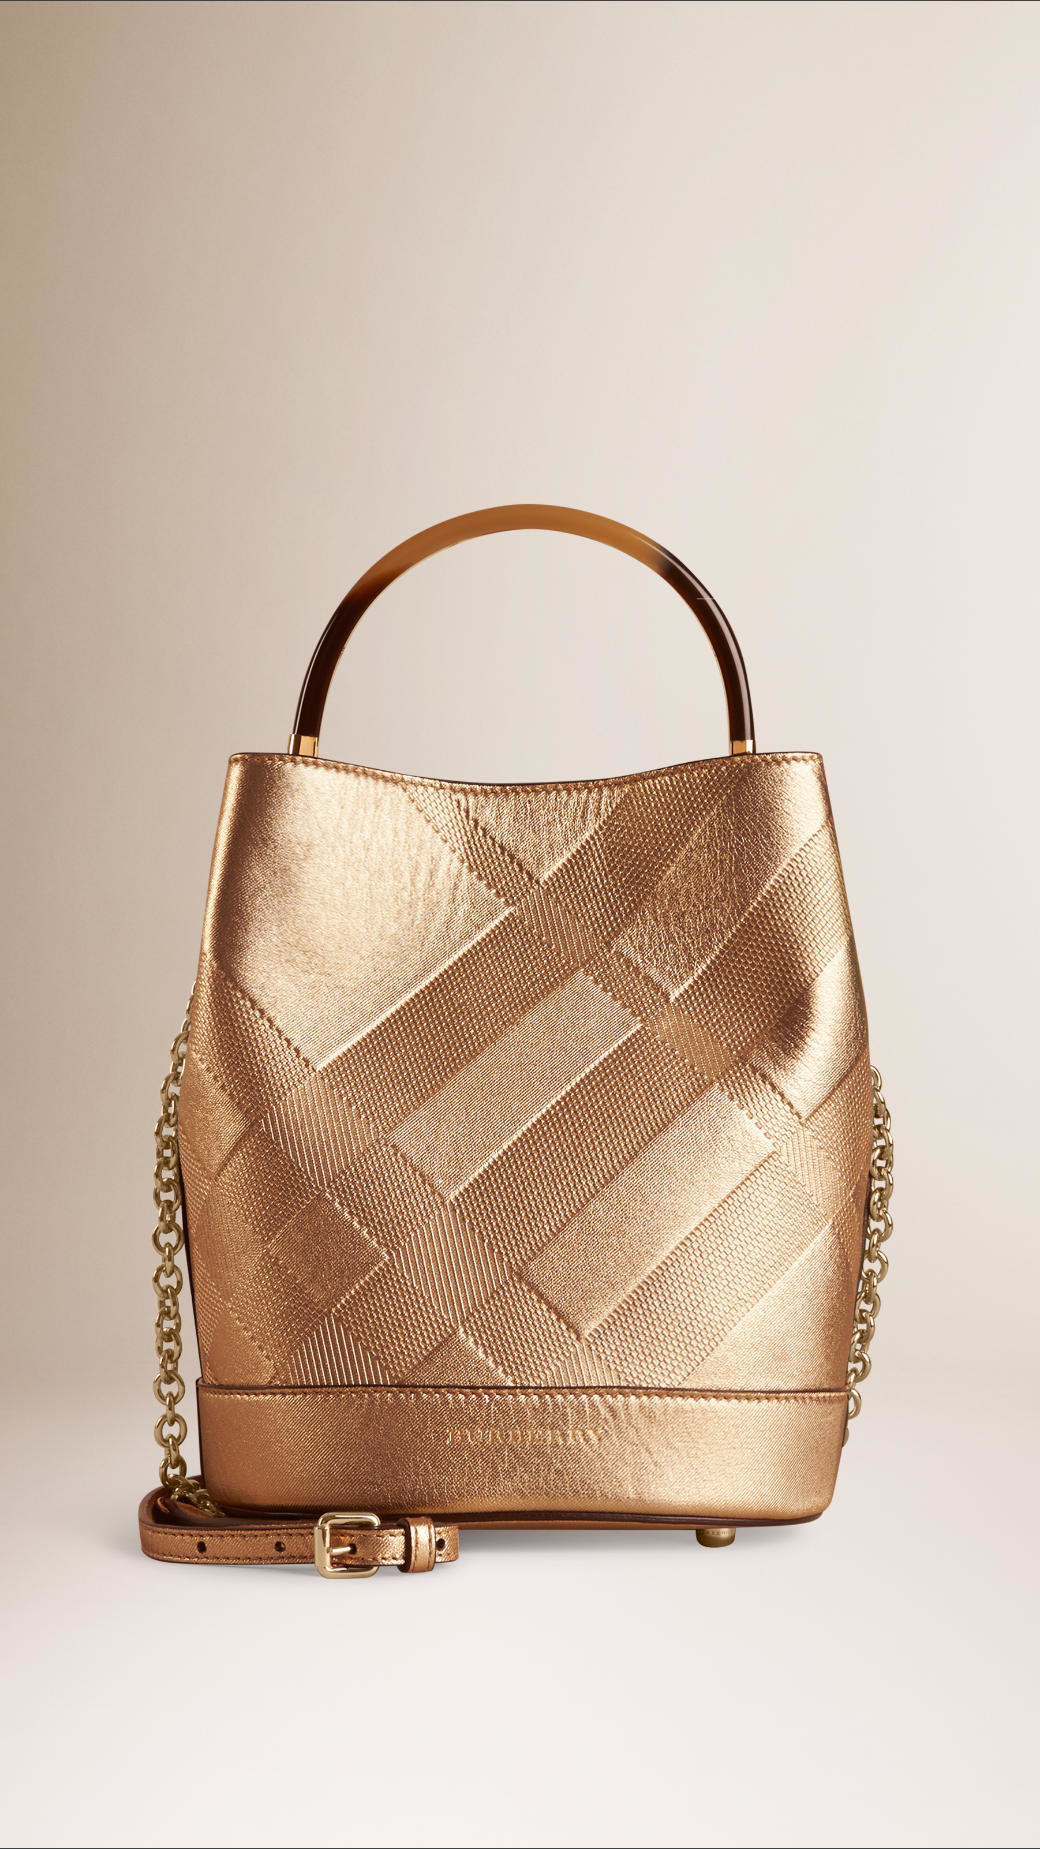 Burberry The Small Bucket Bag In Embossed Check Leather in Gold | Lyst